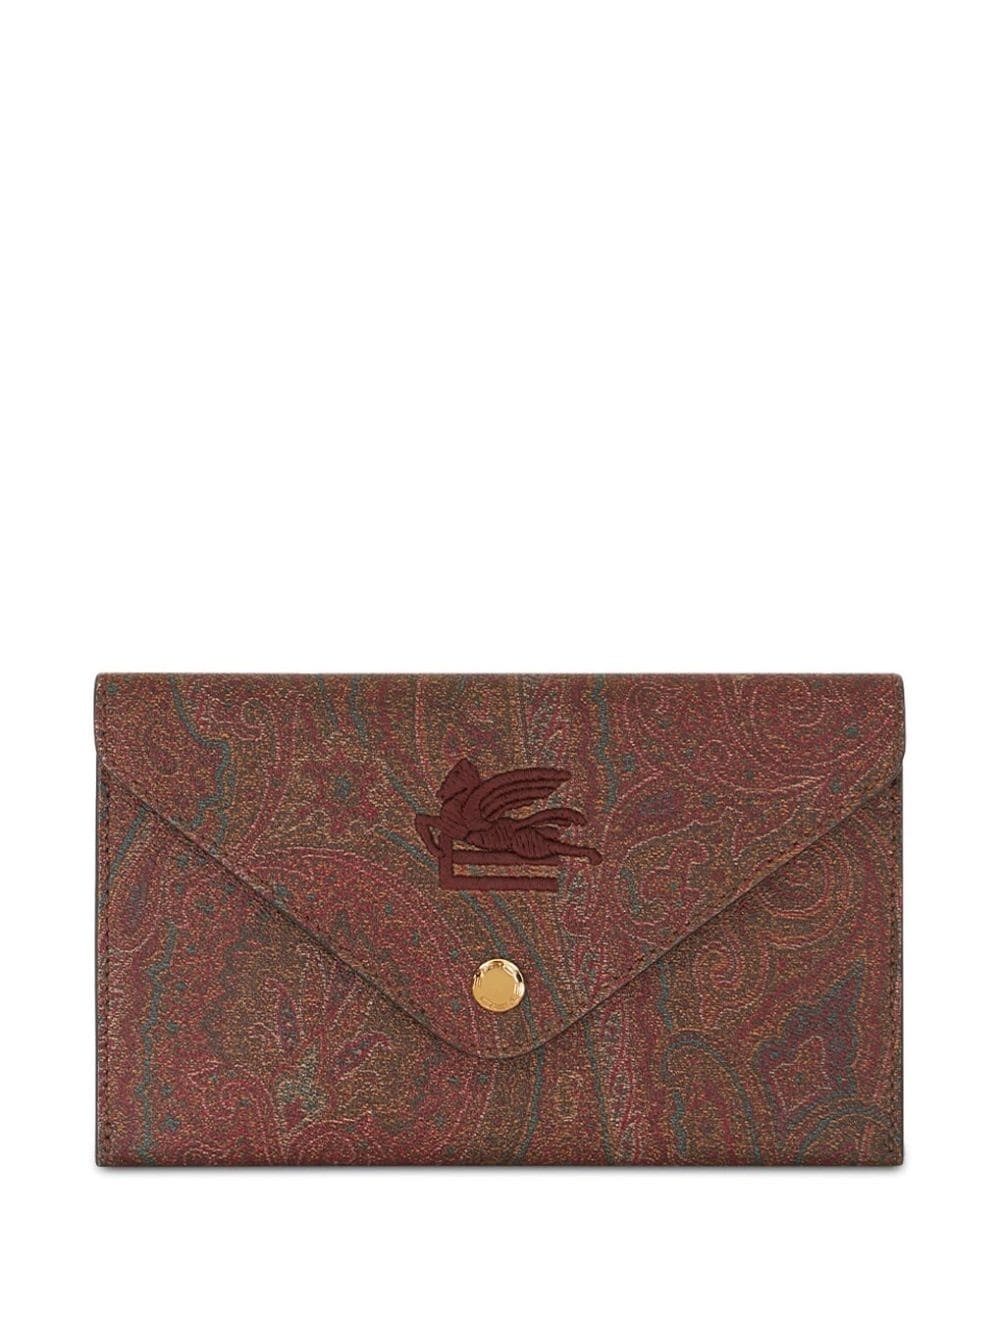 logo-embroidered paisley clutch - 1